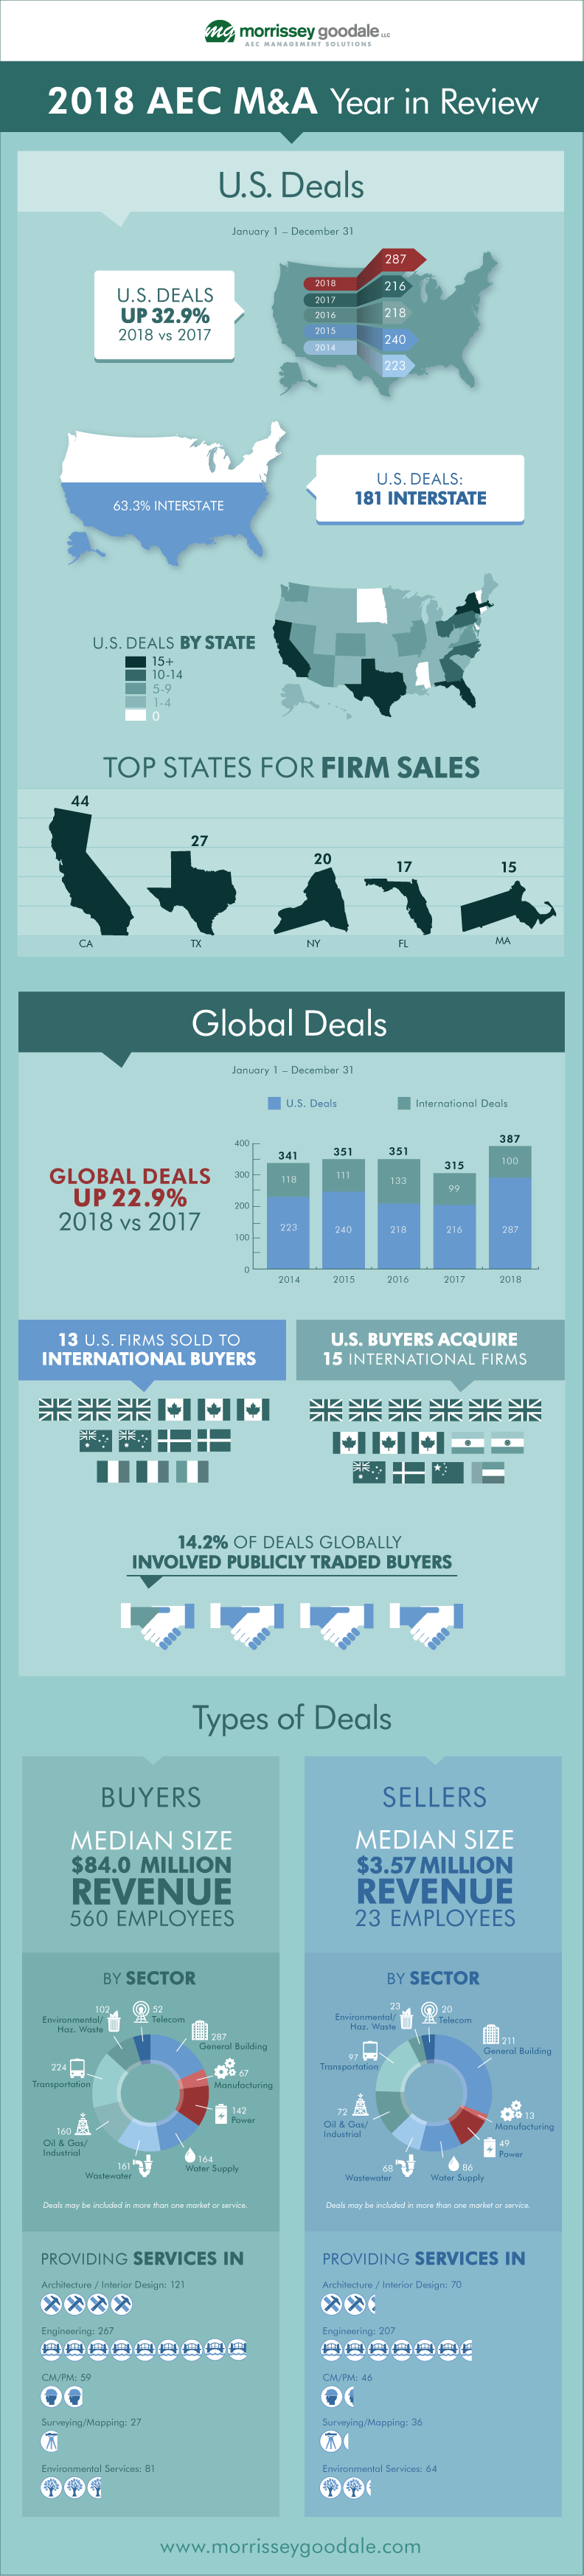 2018 AEC M&A Year in Review Infographic